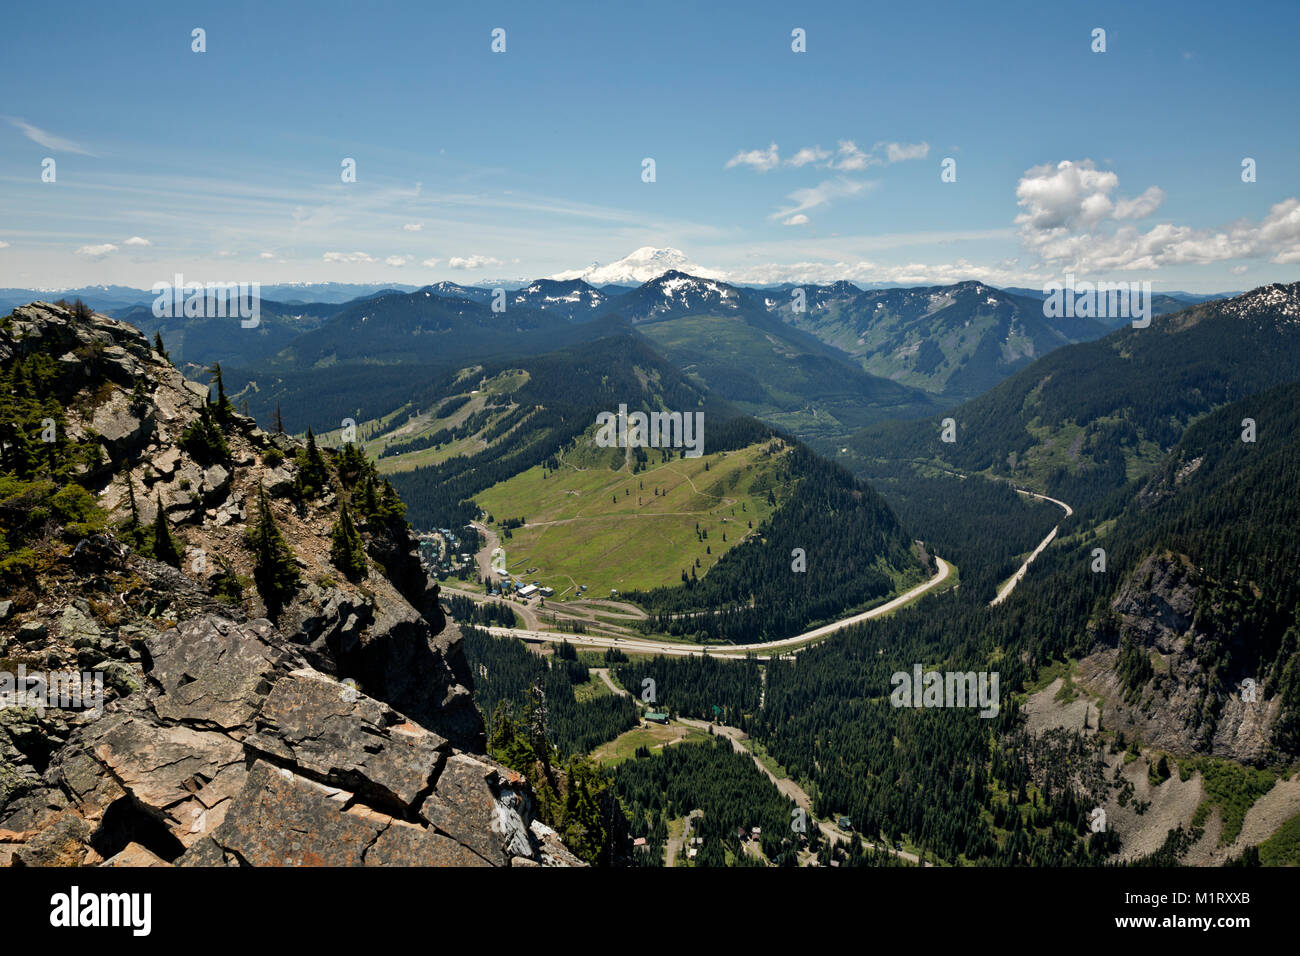 WASHINGTON- Snoqualmie Pass ski areas and Interstate 90 with Mount Rainier to the south from Guye Peak in the Mount Baker - Snoqualmie National Forest Stock Photo